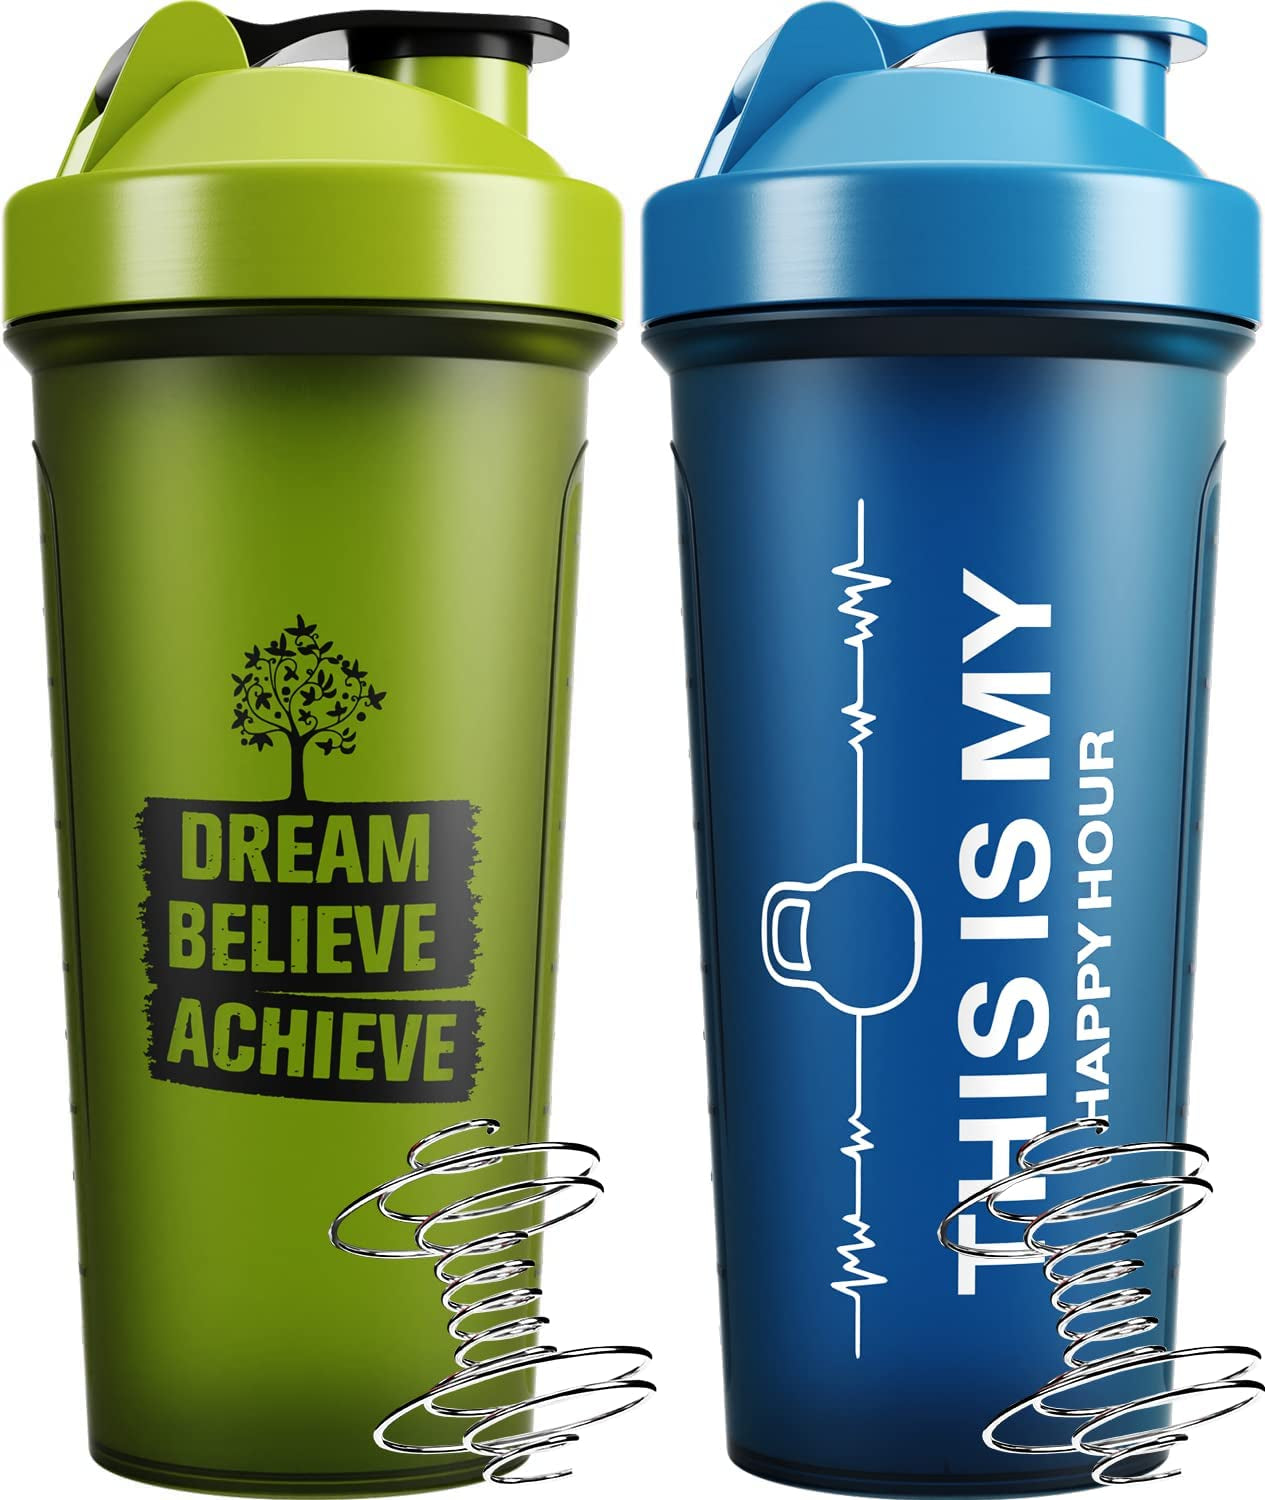 2 PACK Protein Shaker Bottles for Protein Mixes - 24 OZ - Dishwasher Safe Shaker Cups